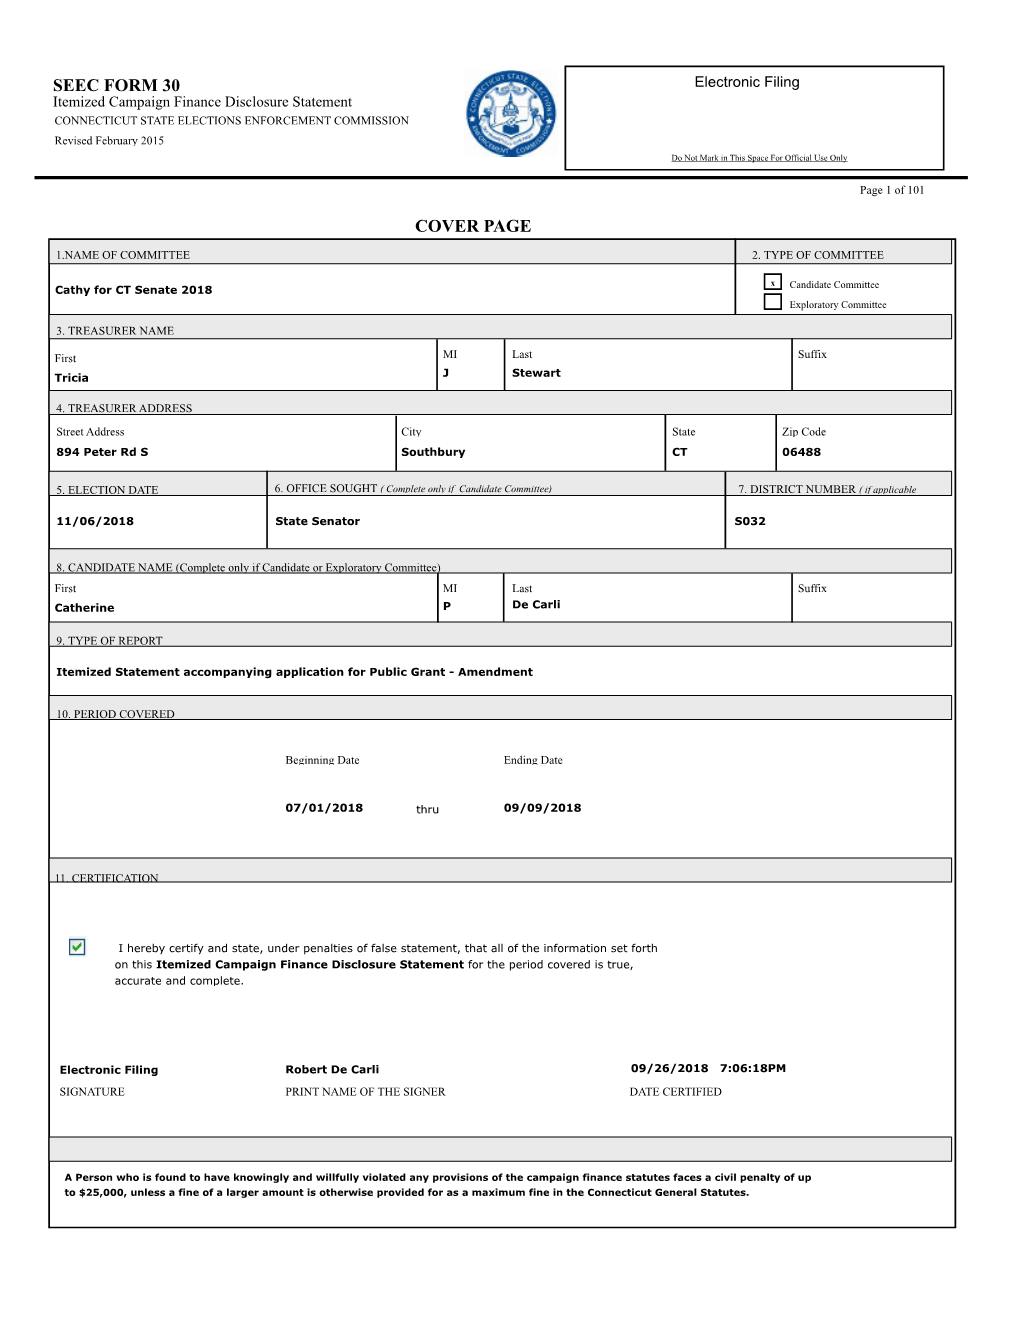 Seec Form 30 Cover Page